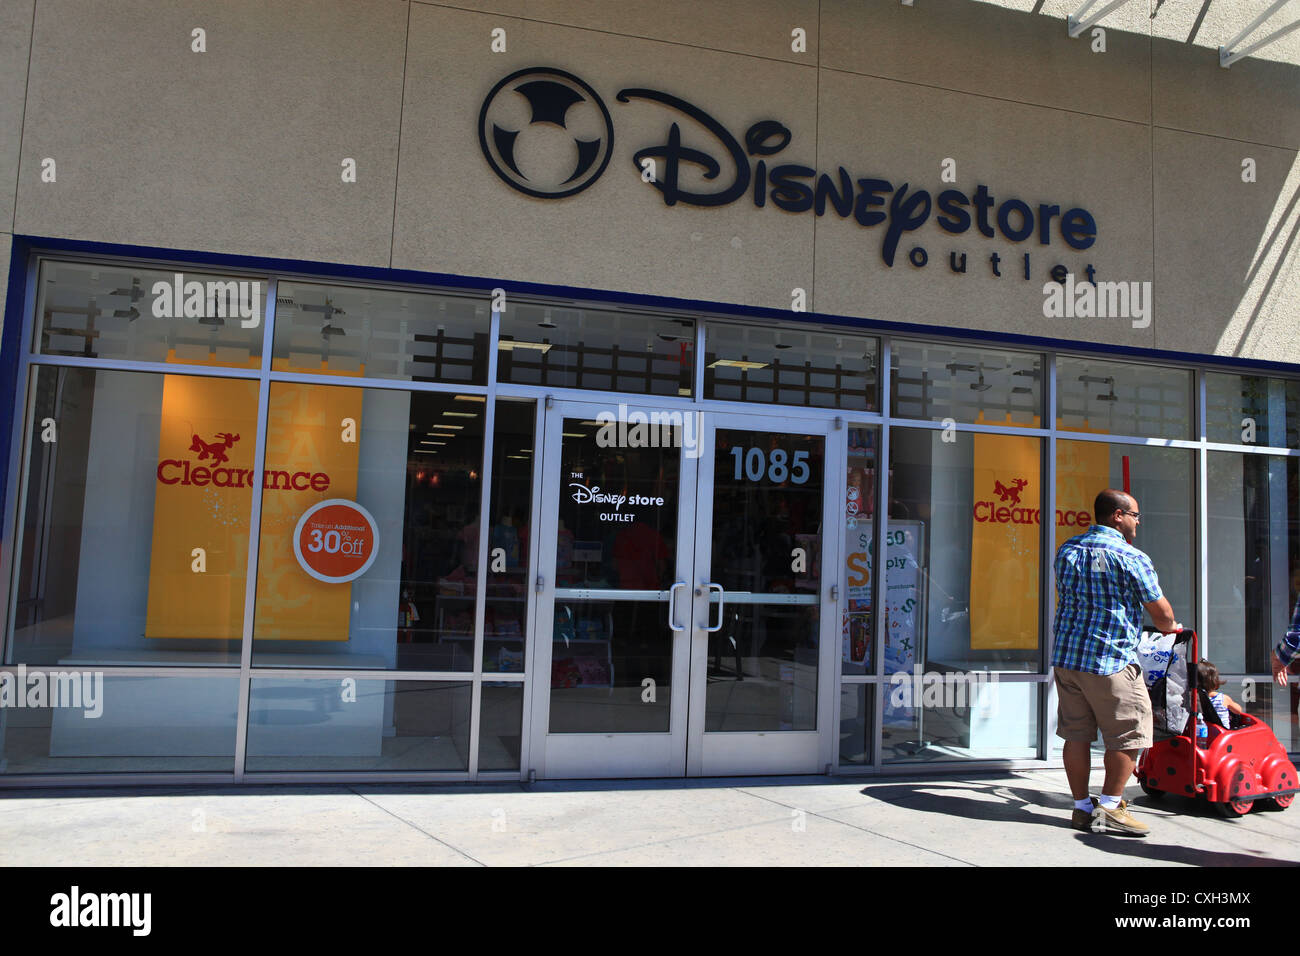 Disney store outlet in Las Vegas North Premium Outlets Shopping Mall Stock Photo, Royalty Free ...